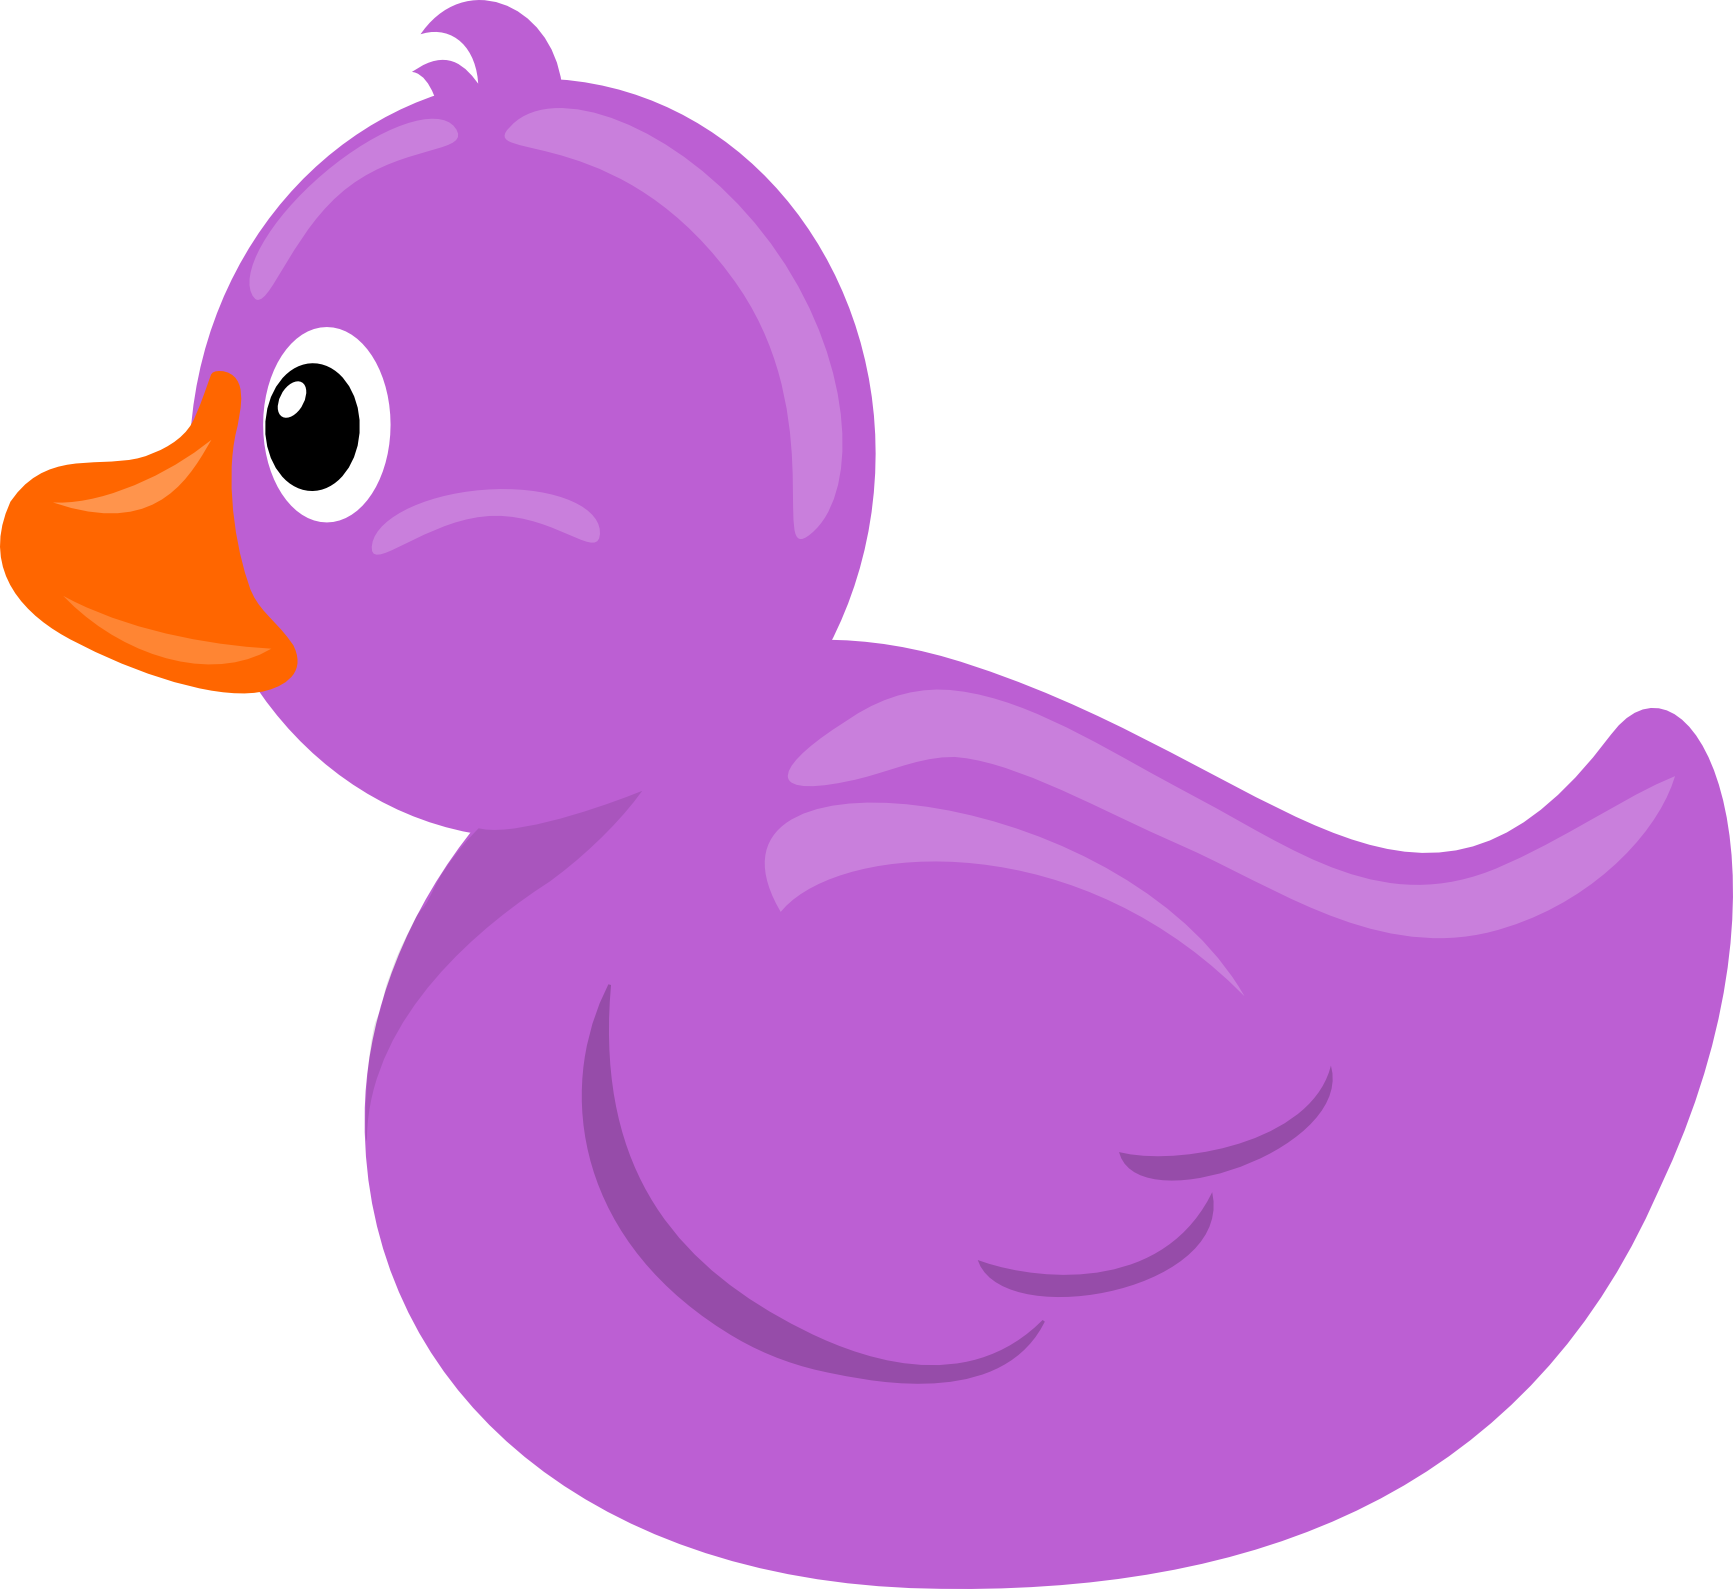 Dinosaur clipart water. Purple duck pencil and